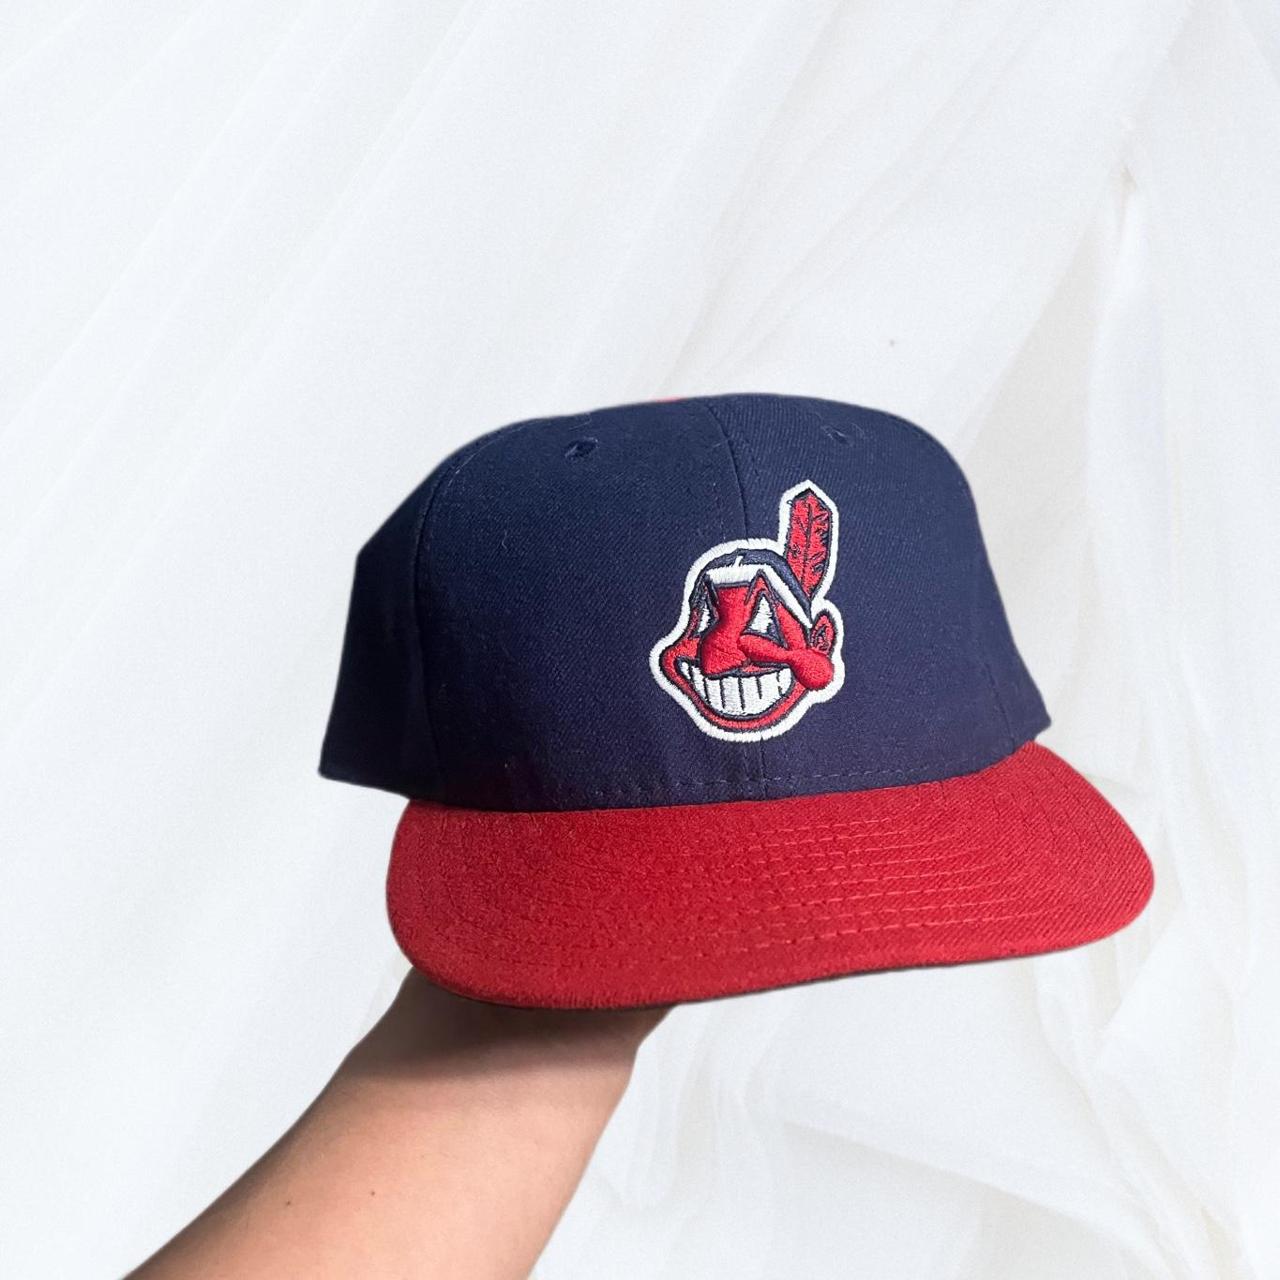 Cleveland Indians hat - no flaws on it - very clean - Depop